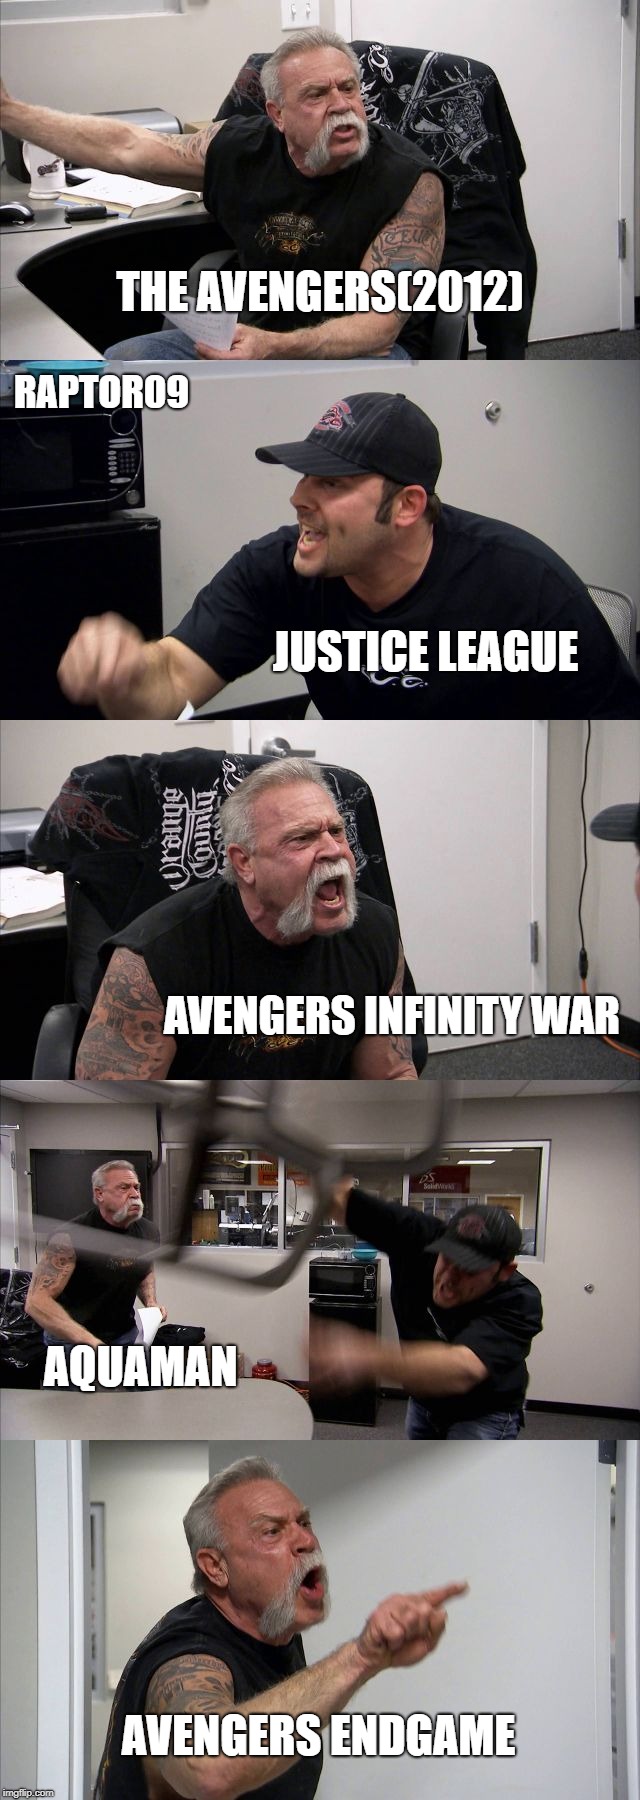 American Chopper Argument | RAPTOR09; THE AVENGERS(2012); JUSTICE LEAGUE; AVENGERS INFINITY WAR; AQUAMAN; AVENGERS ENDGAME | image tagged in memes,american chopper argument | made w/ Imgflip meme maker